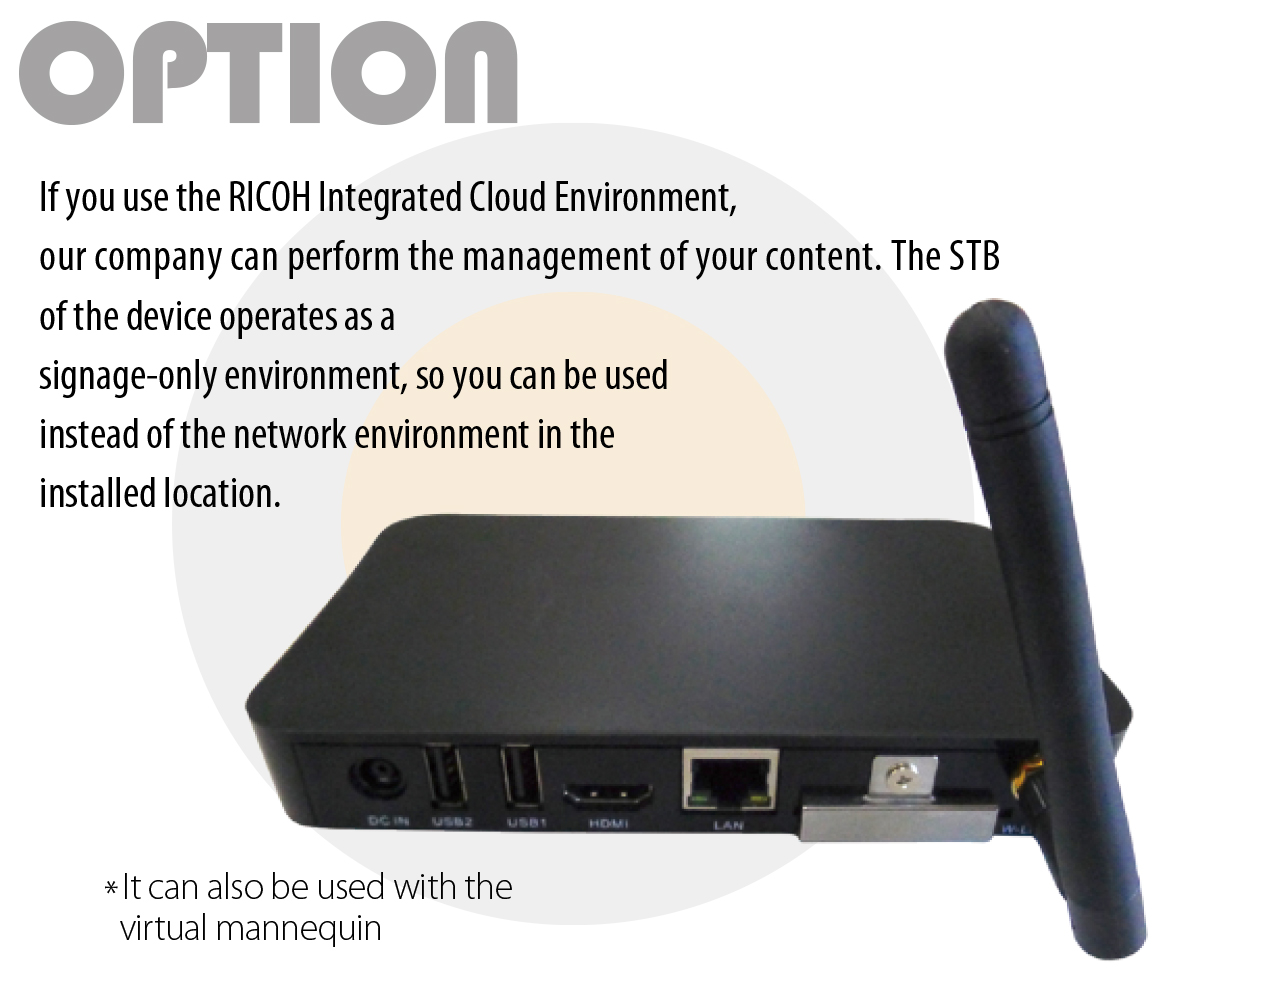 OPTION If you use the RICOH Integrated Cloud Environment, our company can perform the management of your content. The STB of the device operates as a signage-only environment, so you can be used instead of the network environment in the installed location. *It can also be used with the virtual mannequin